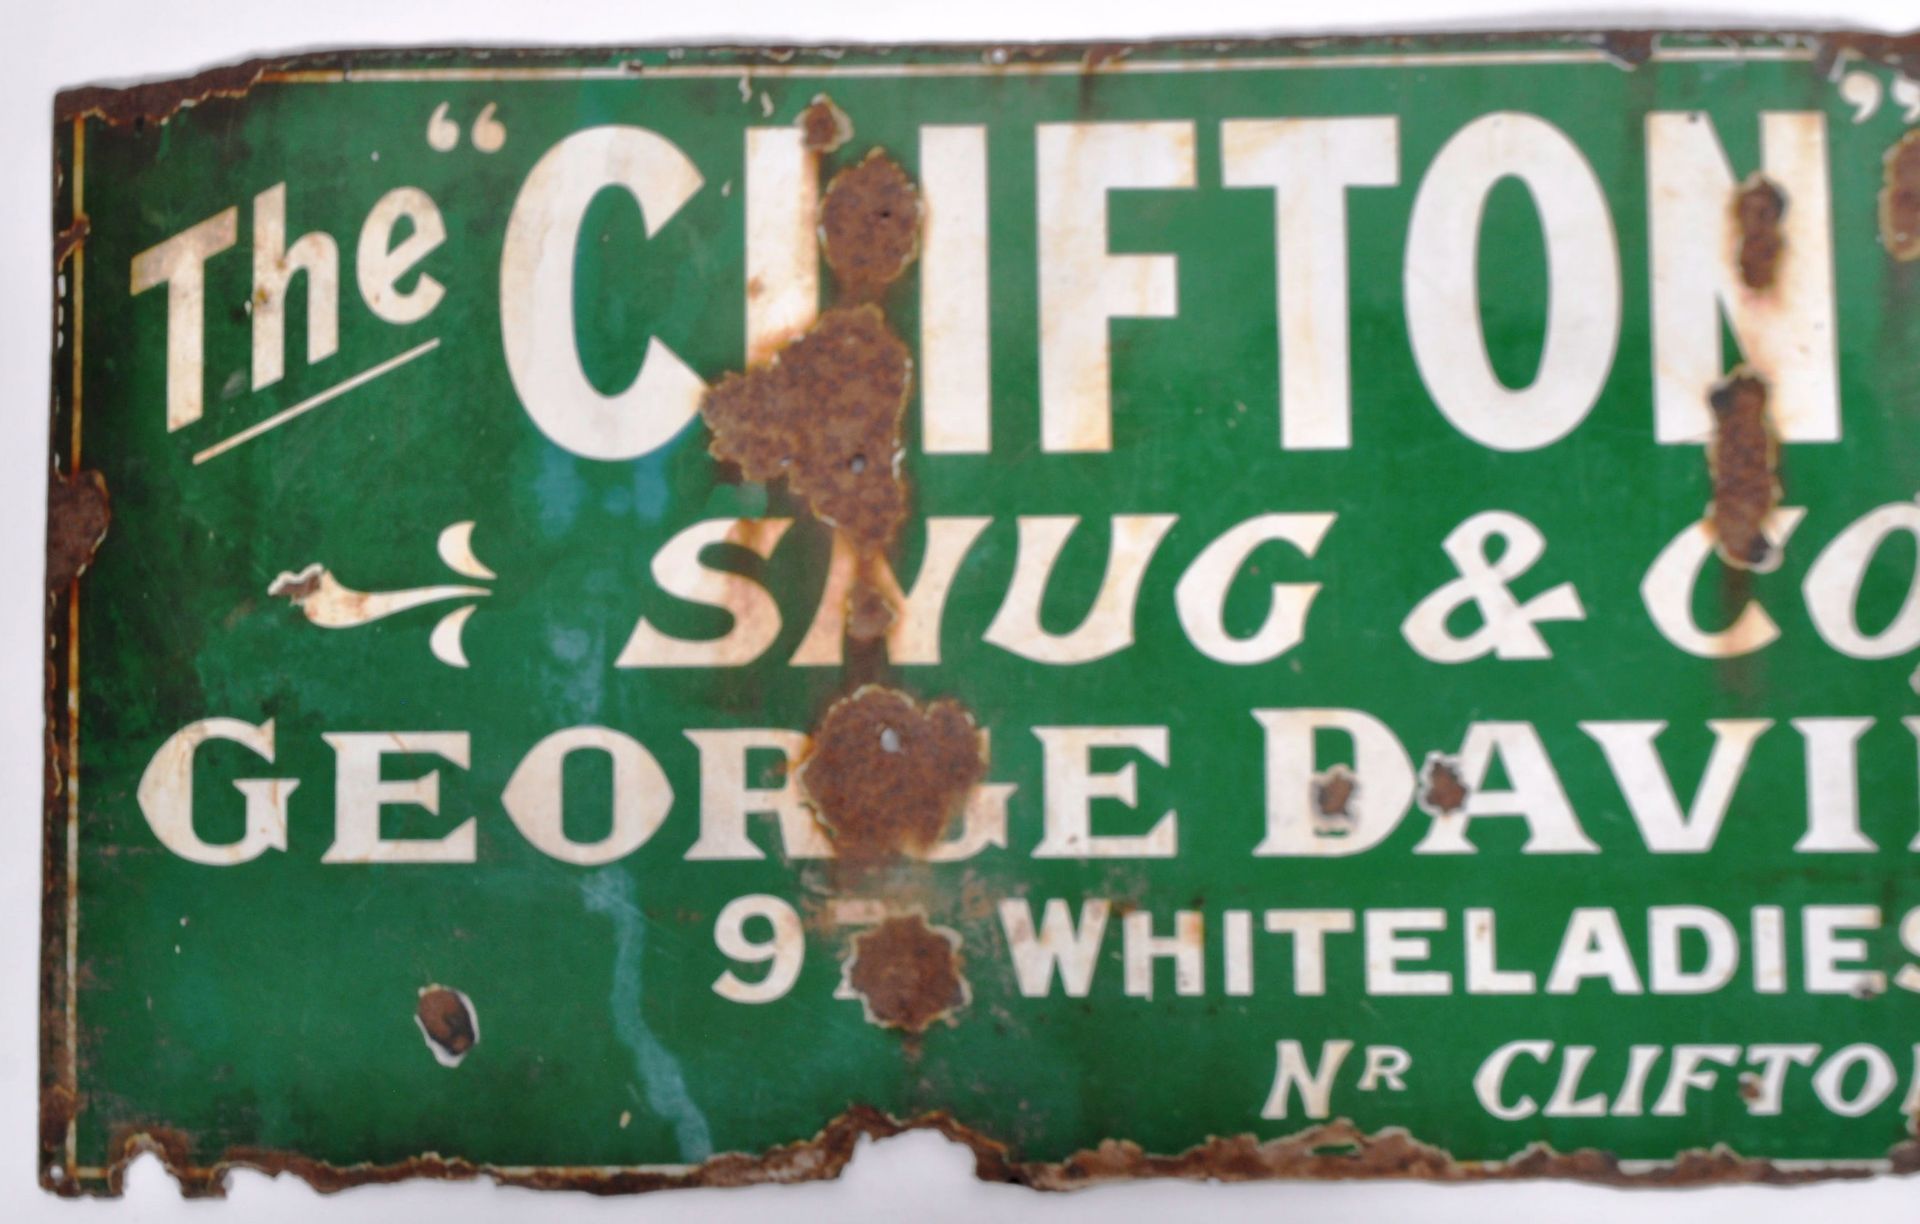 ENAMEL ADVERTISING SIGN - "THE CLIFTON TEA ROOMS" - Image 2 of 4